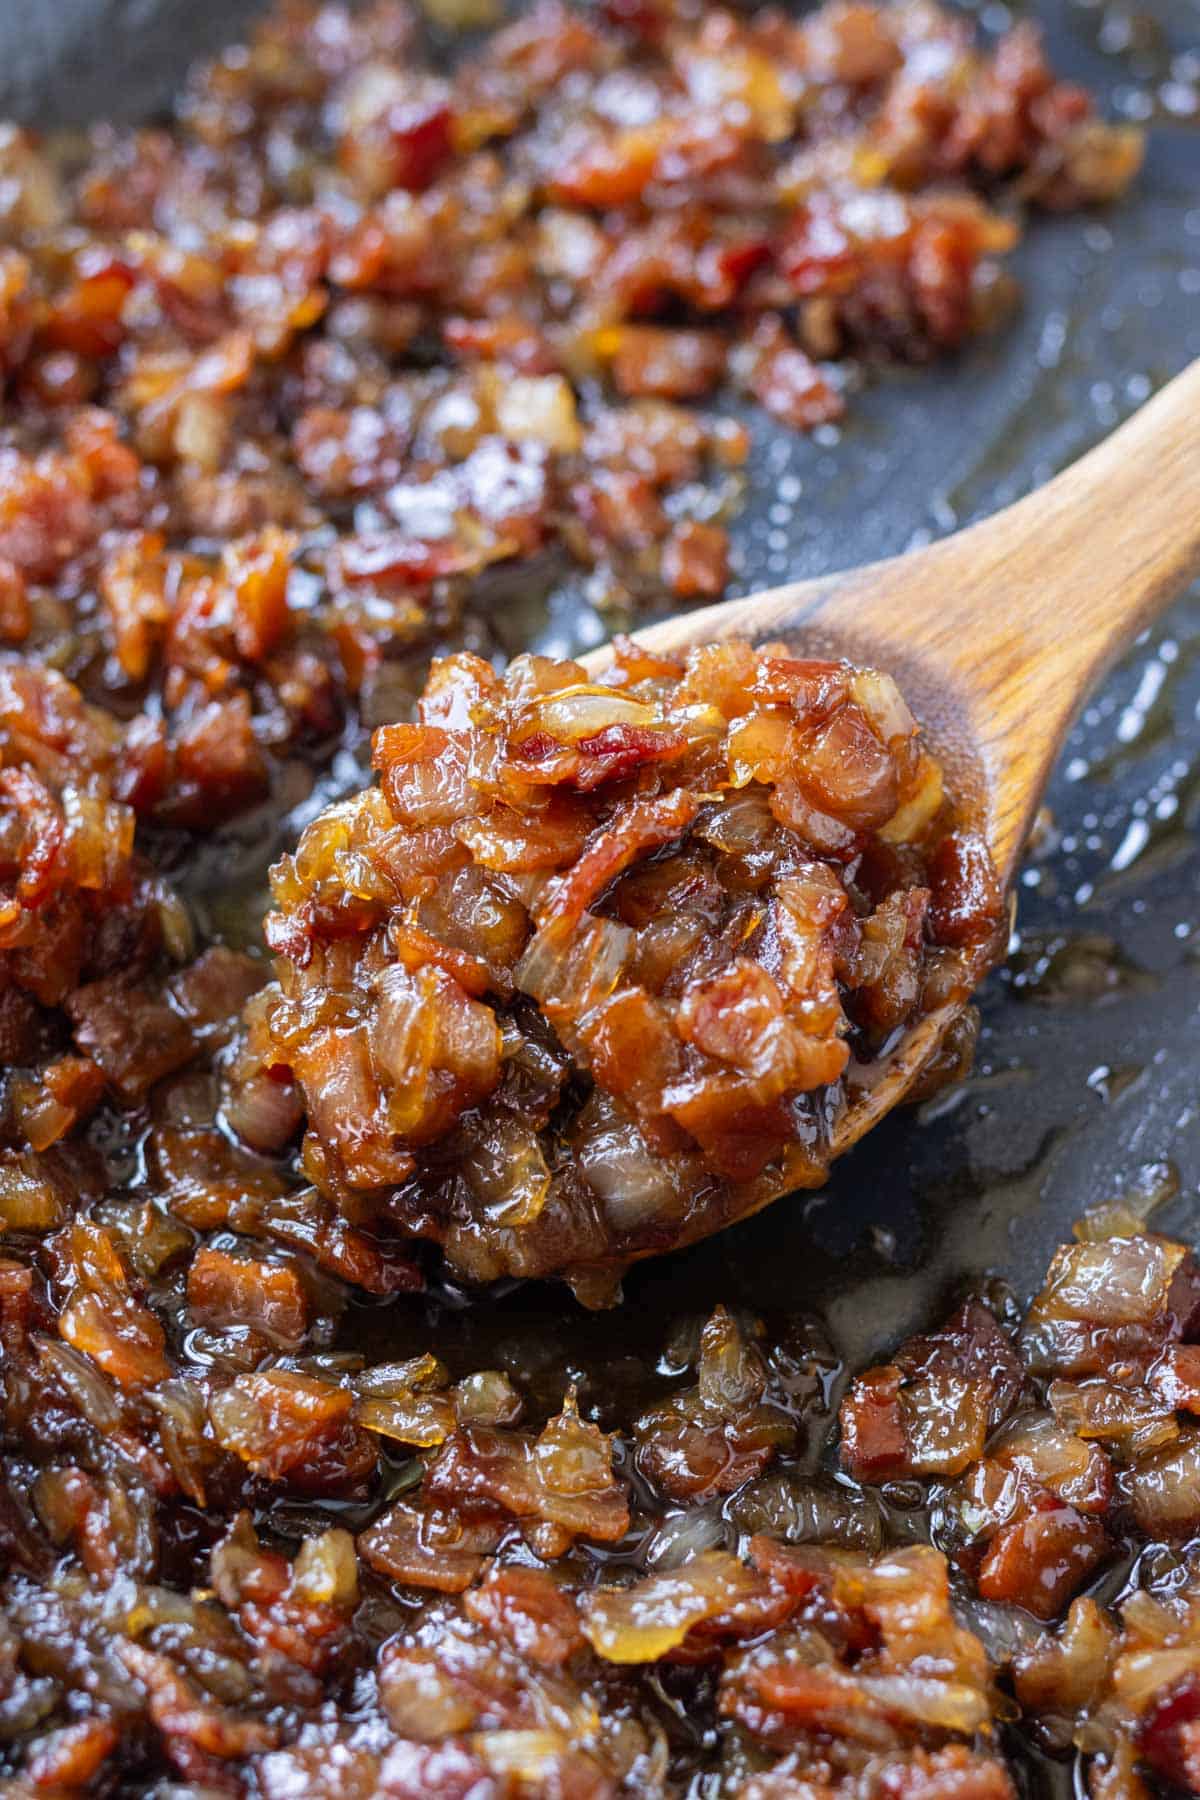 A wooden spoons scoops up some bacon jam with onions from a skillet.